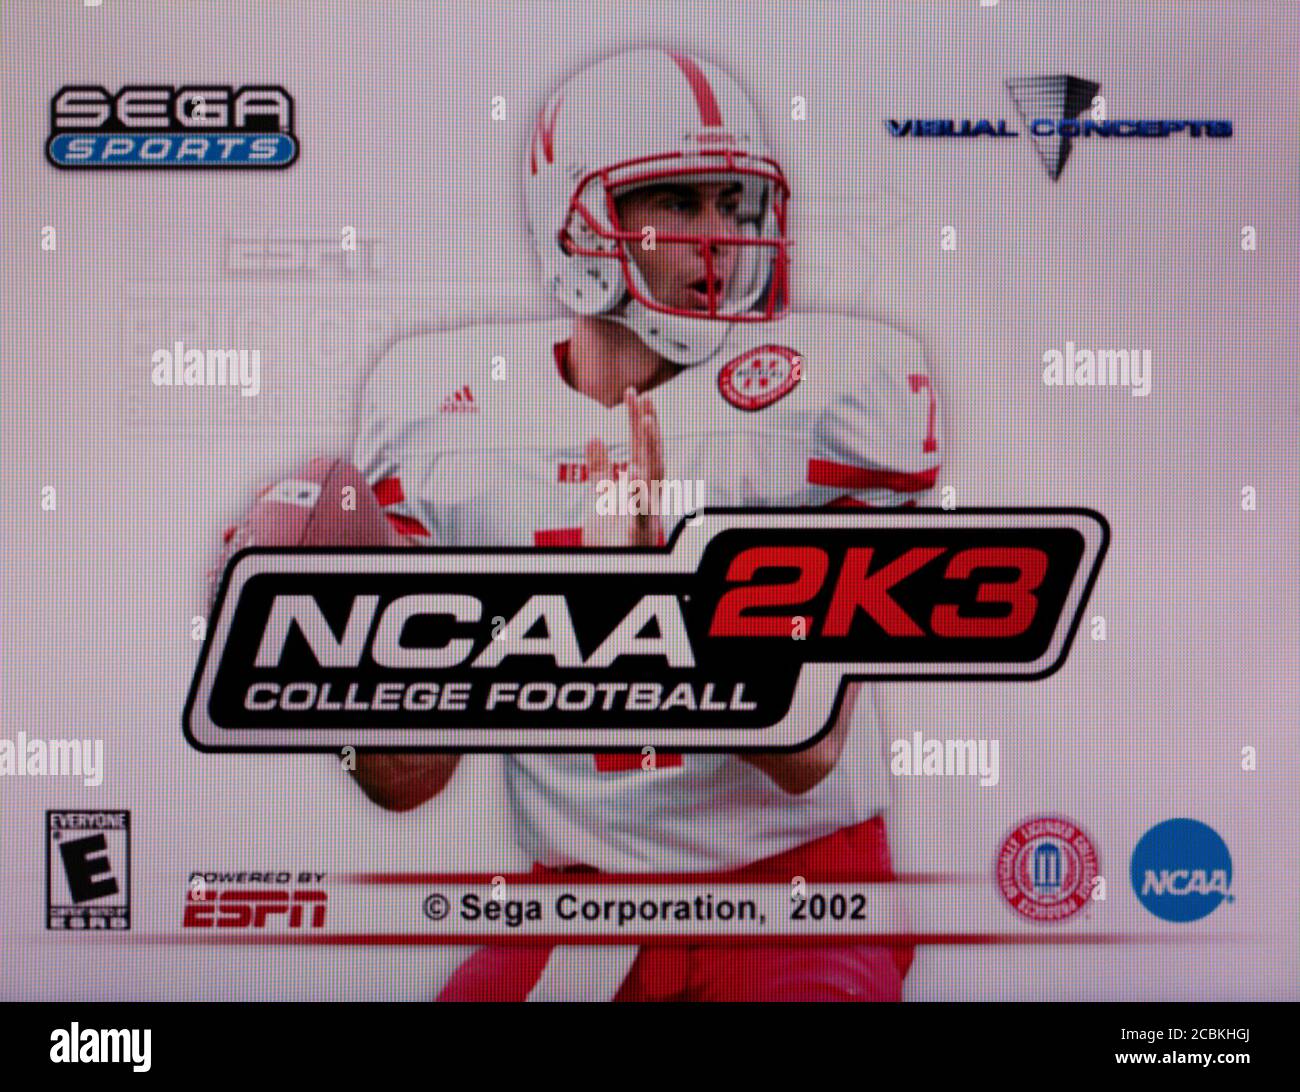 NCAA College Football 2K3 - Nintendo Gamecube Videogame - Editorial use only Stock Photo